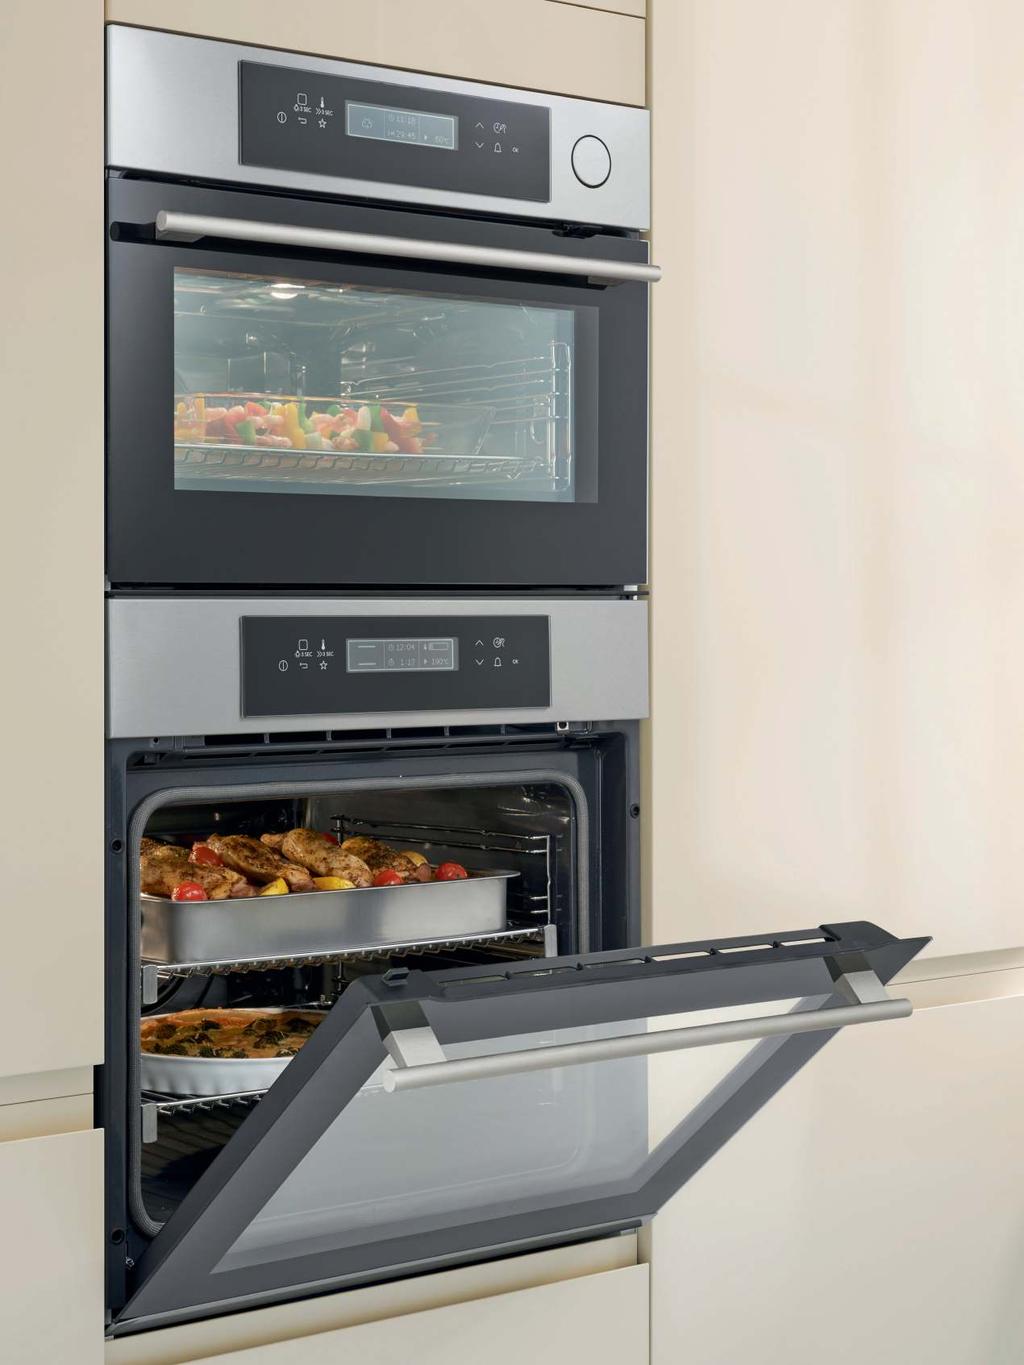 OVENS Our ovens are beautifully crafted to meet all your cooking demands and needs.